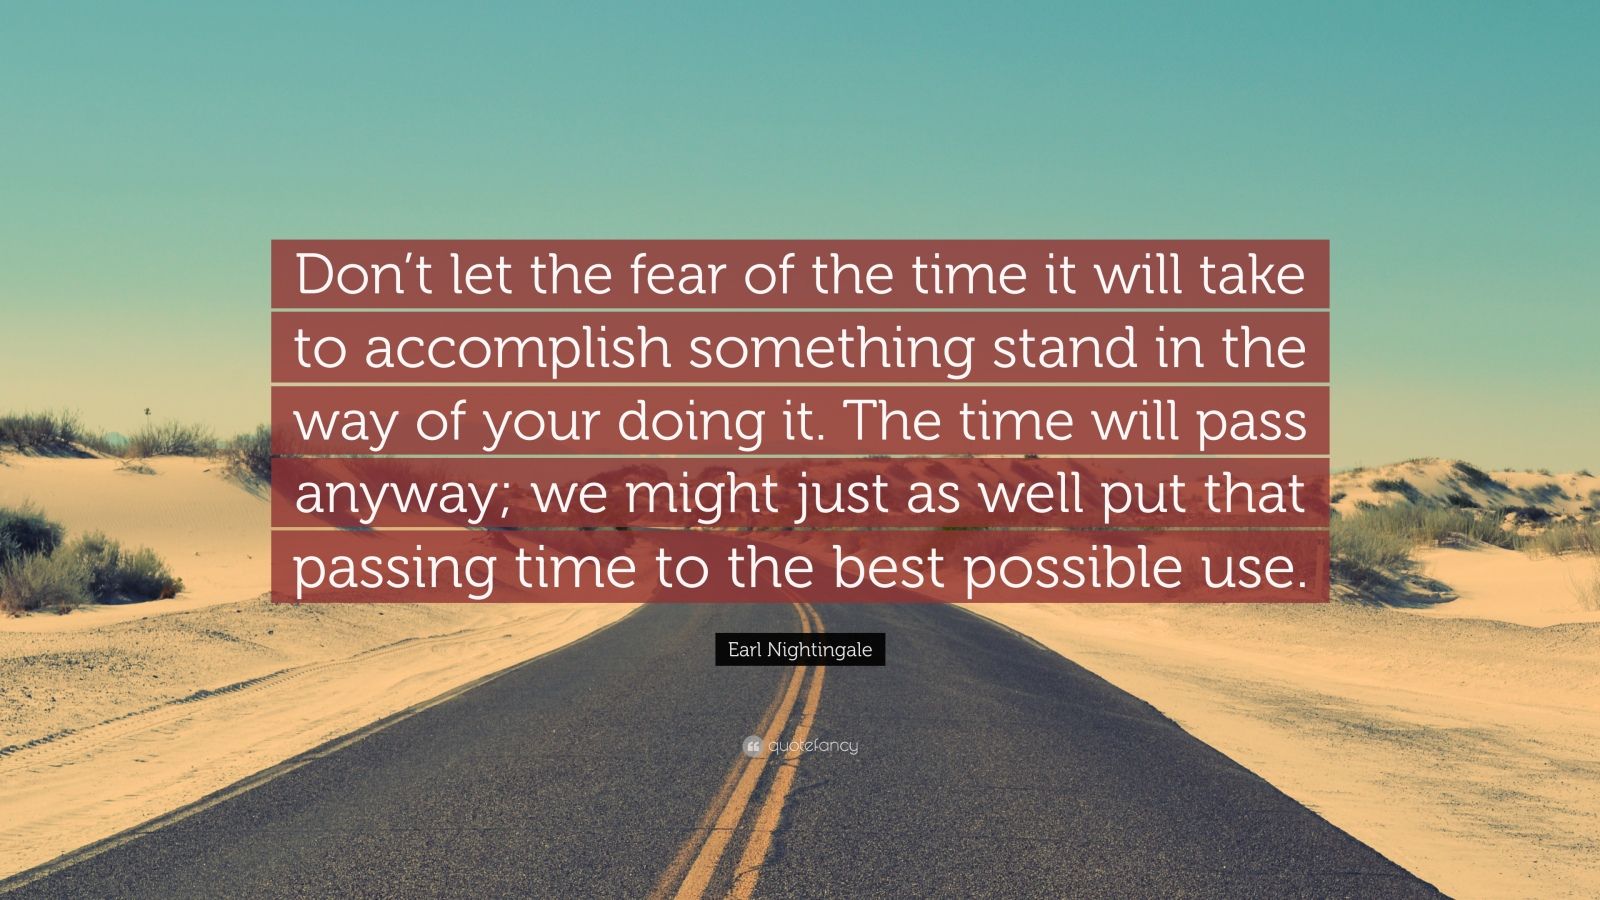 Earl Nightingale Quote: “Don’t let the fear of the time it will take to ...